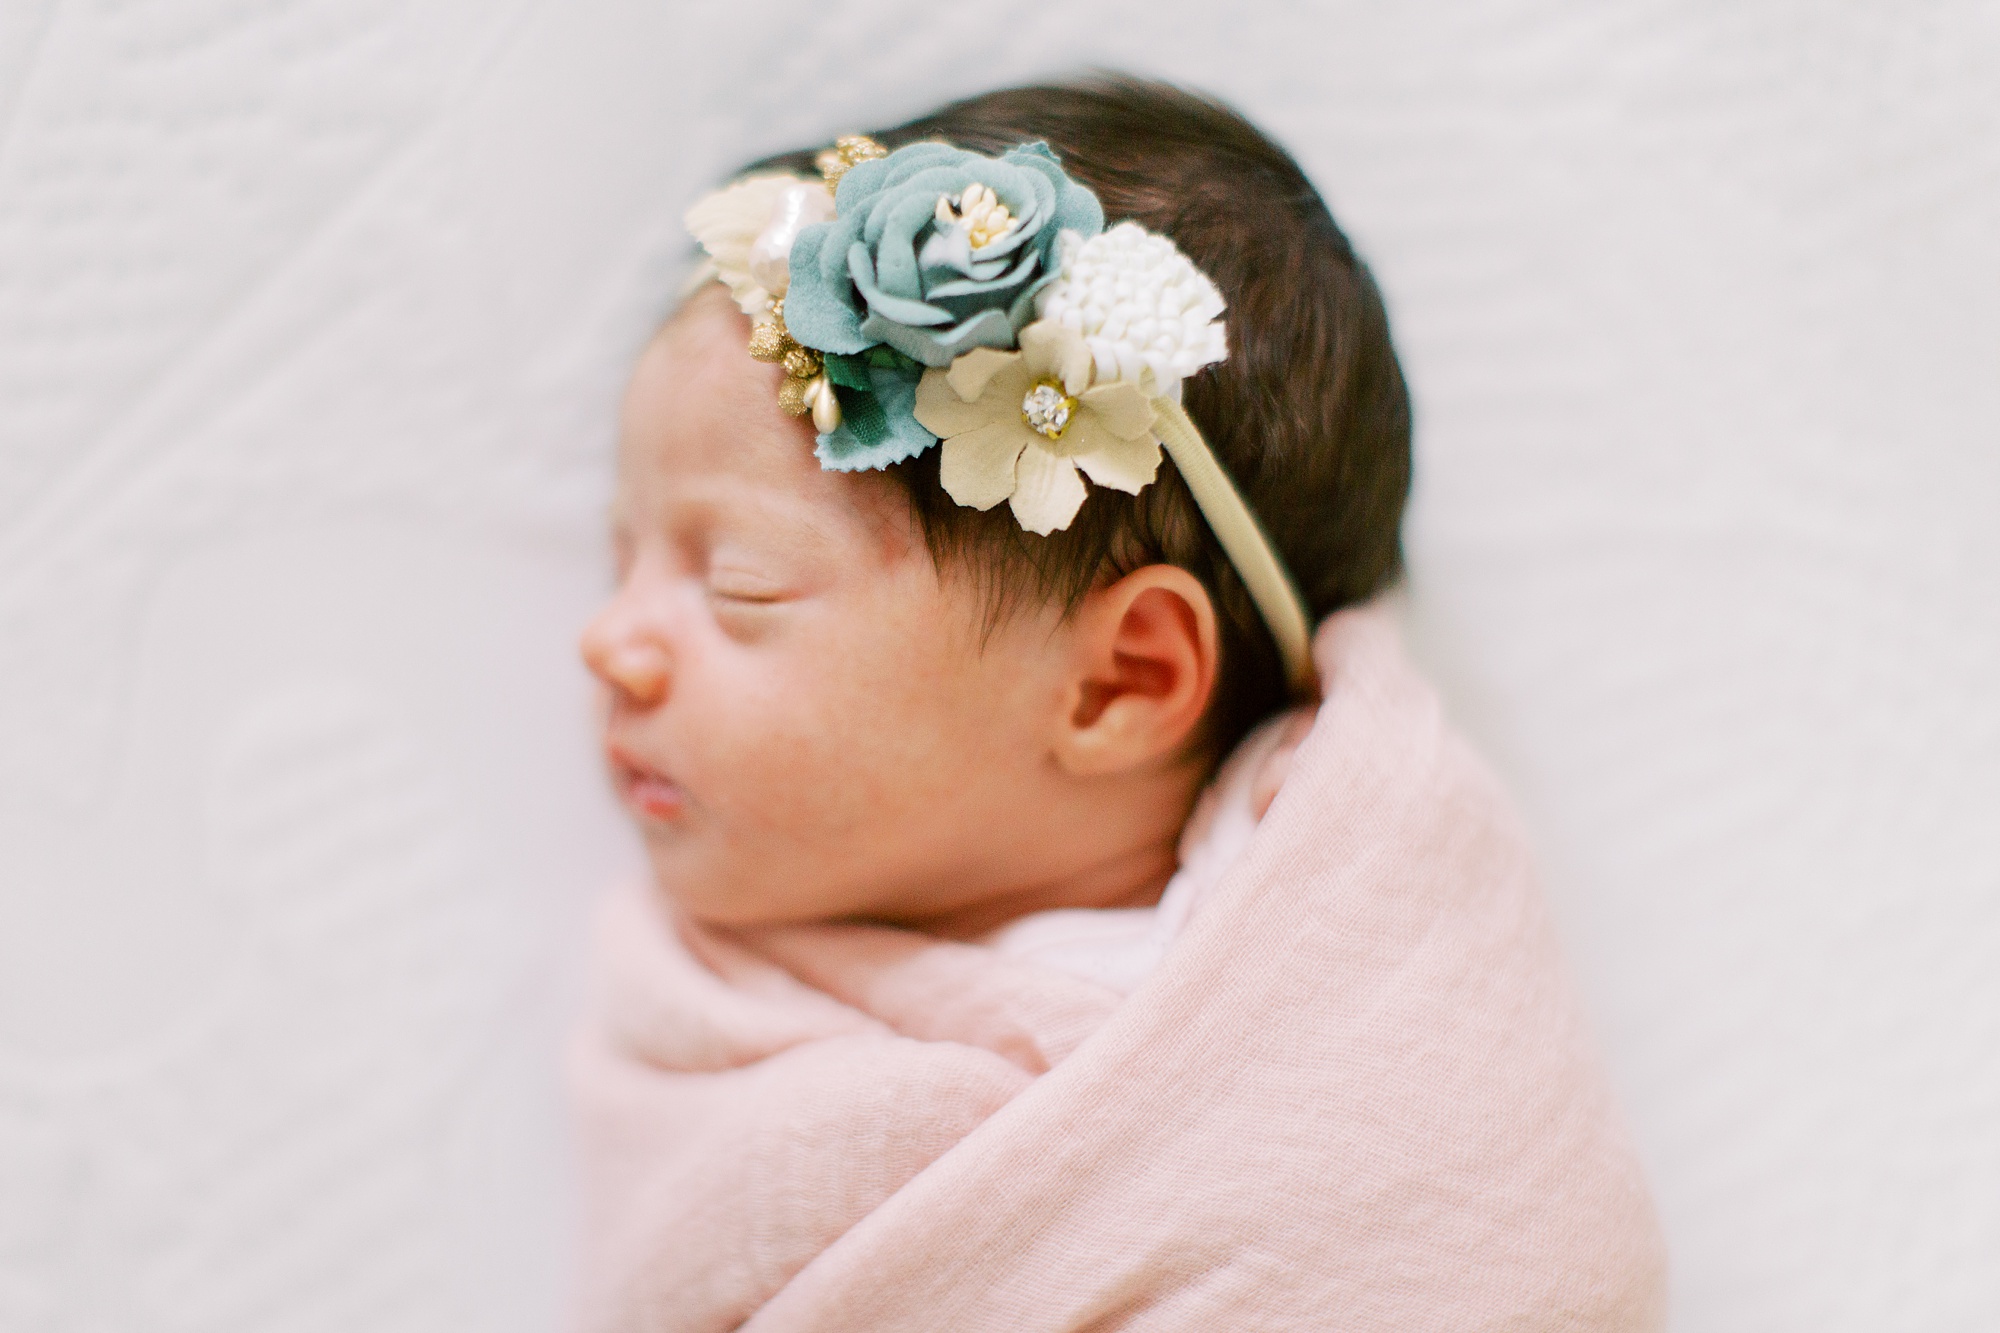 baby sleeps in pink wrap with floral headband during newborn photos